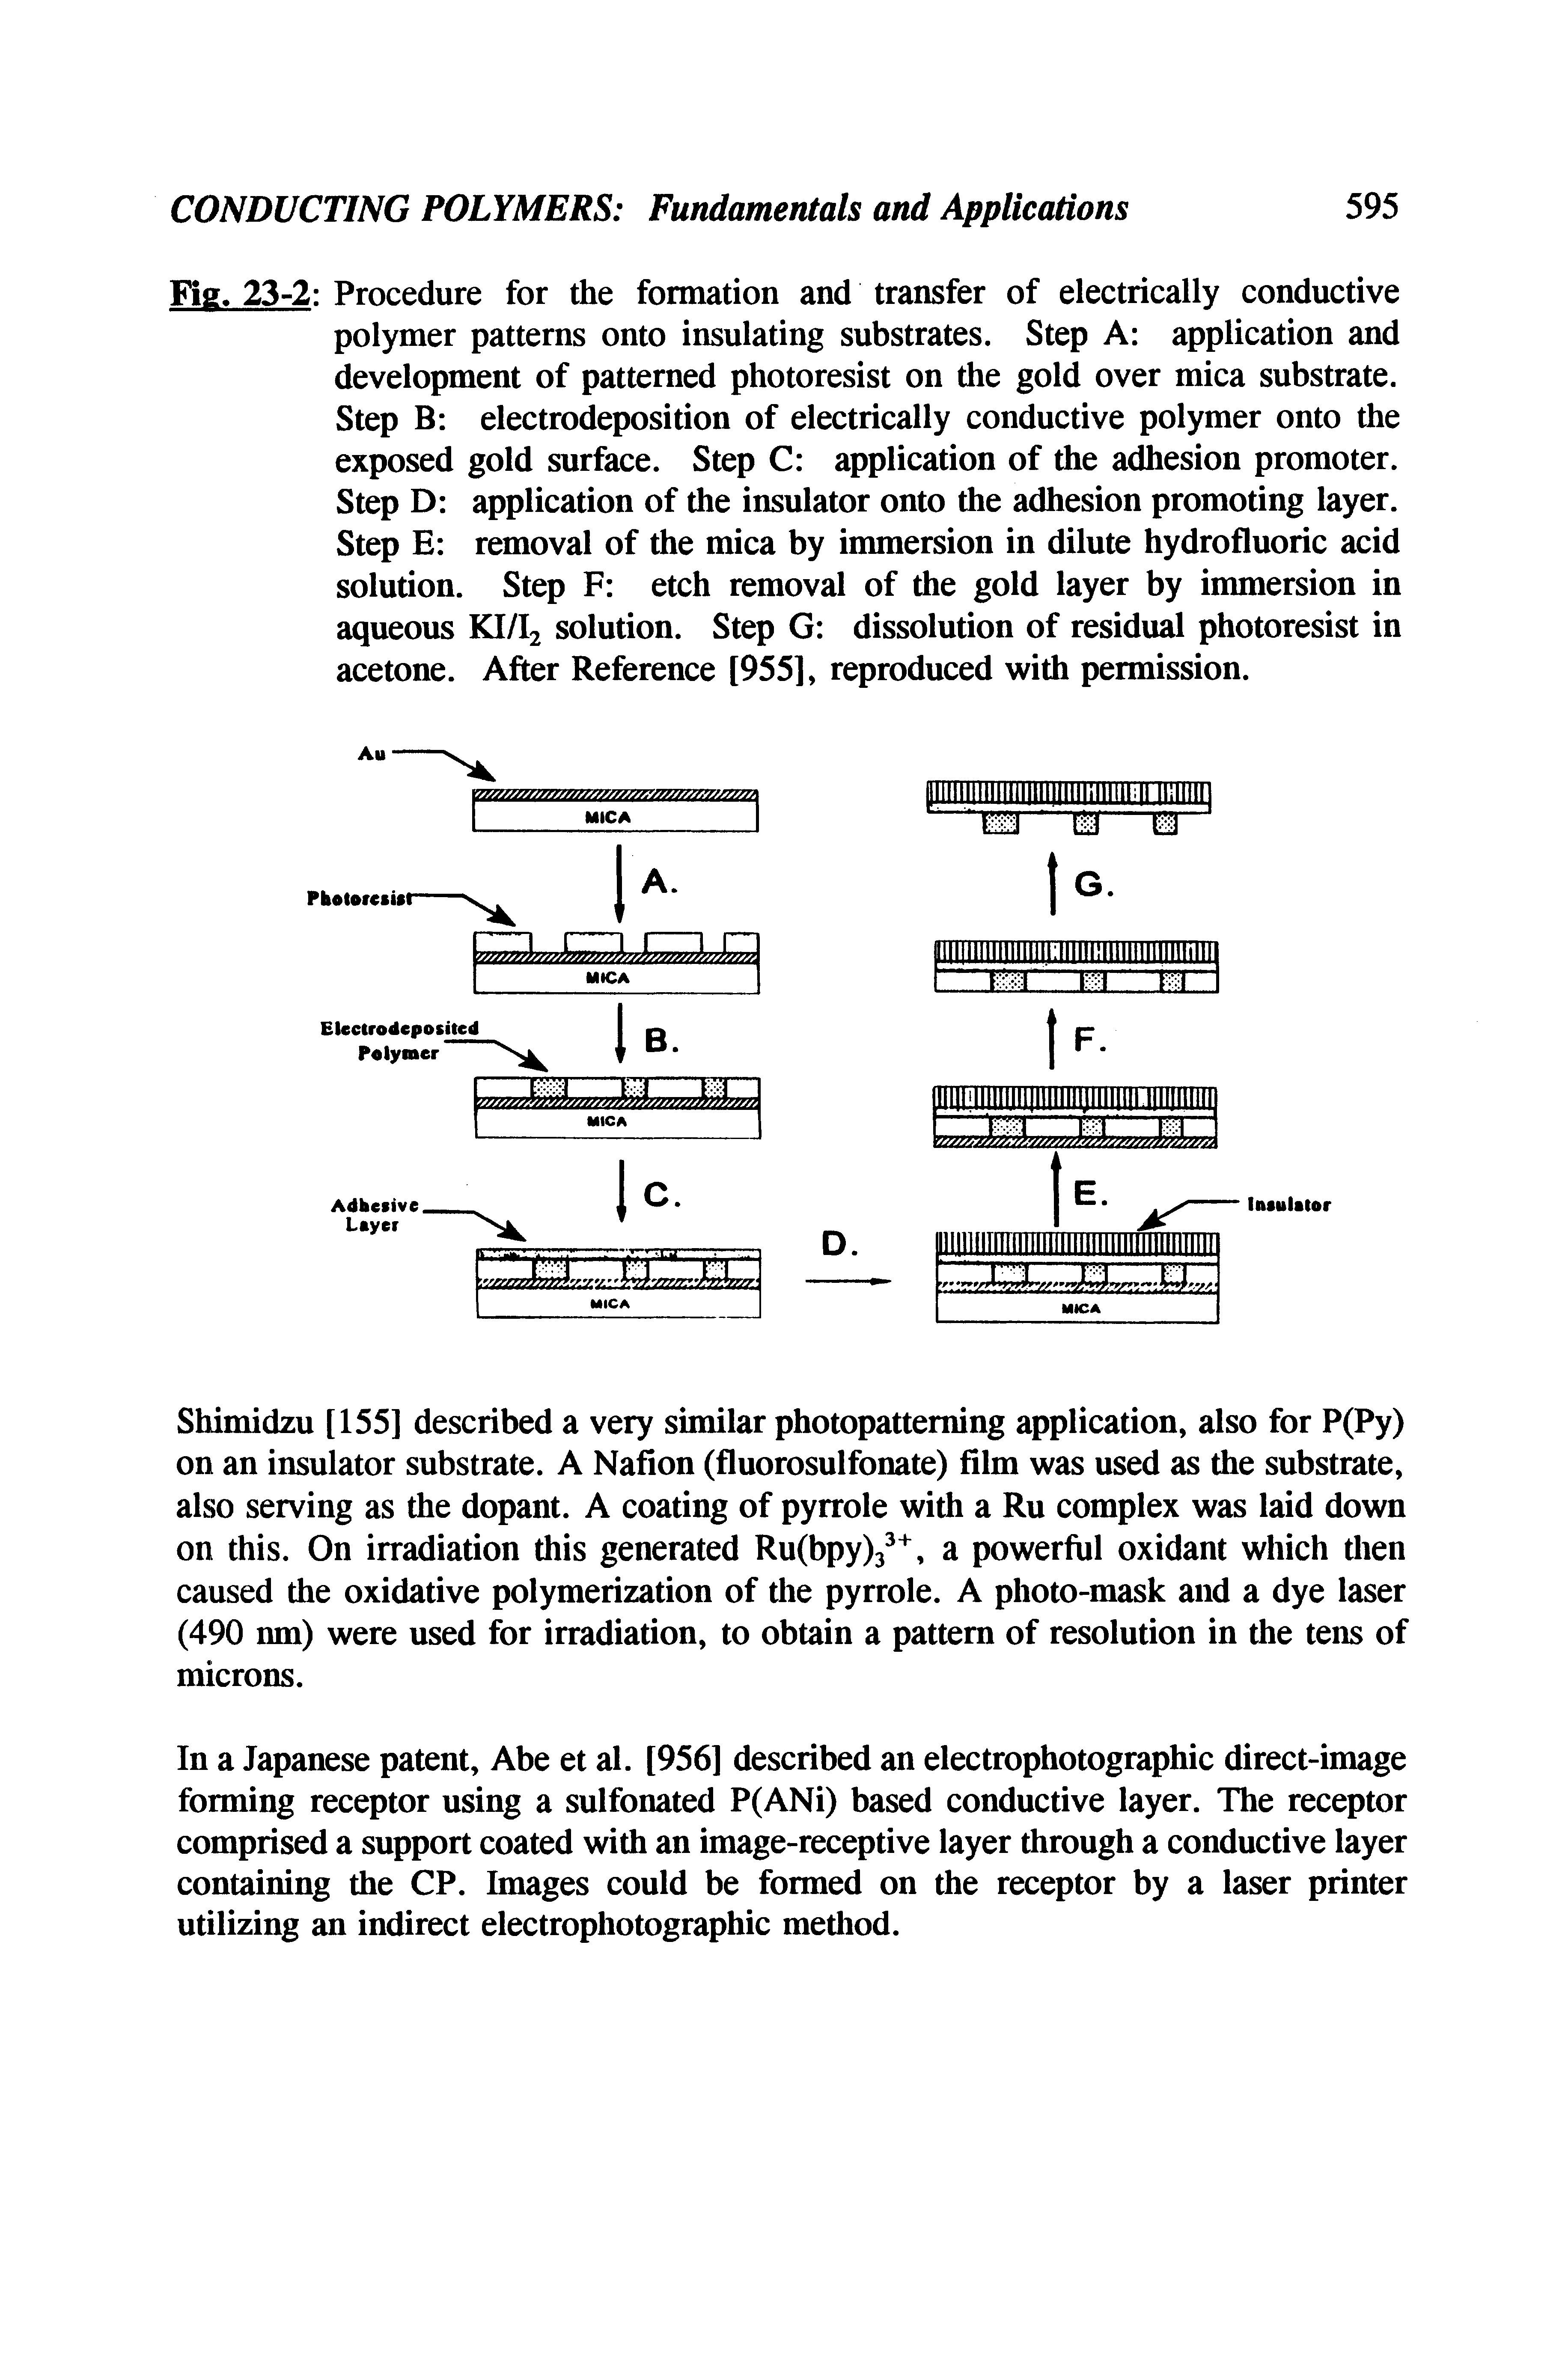 Fig. 23-2 Procedure for the formation and transfer of electrically conductive polymer patterns onto insulating substrates. Step A application and development of patterned photoresist on the gold over mica substrate. Step B electrodeposition of electrically conductive polymer onto the exposed gold surface. Step C application of the adhesion promoter. Step D application of the insulator onto the adhesion promoting layer. Step E removal of the mica by immersion in dilute hydrofluoric acid solution. Step F etch removal of the gold layer by immersion in aqueous KI/I2 solution. Step G dissolution of residual photoresist in acetone. After Reference [955], reproduced with permission.